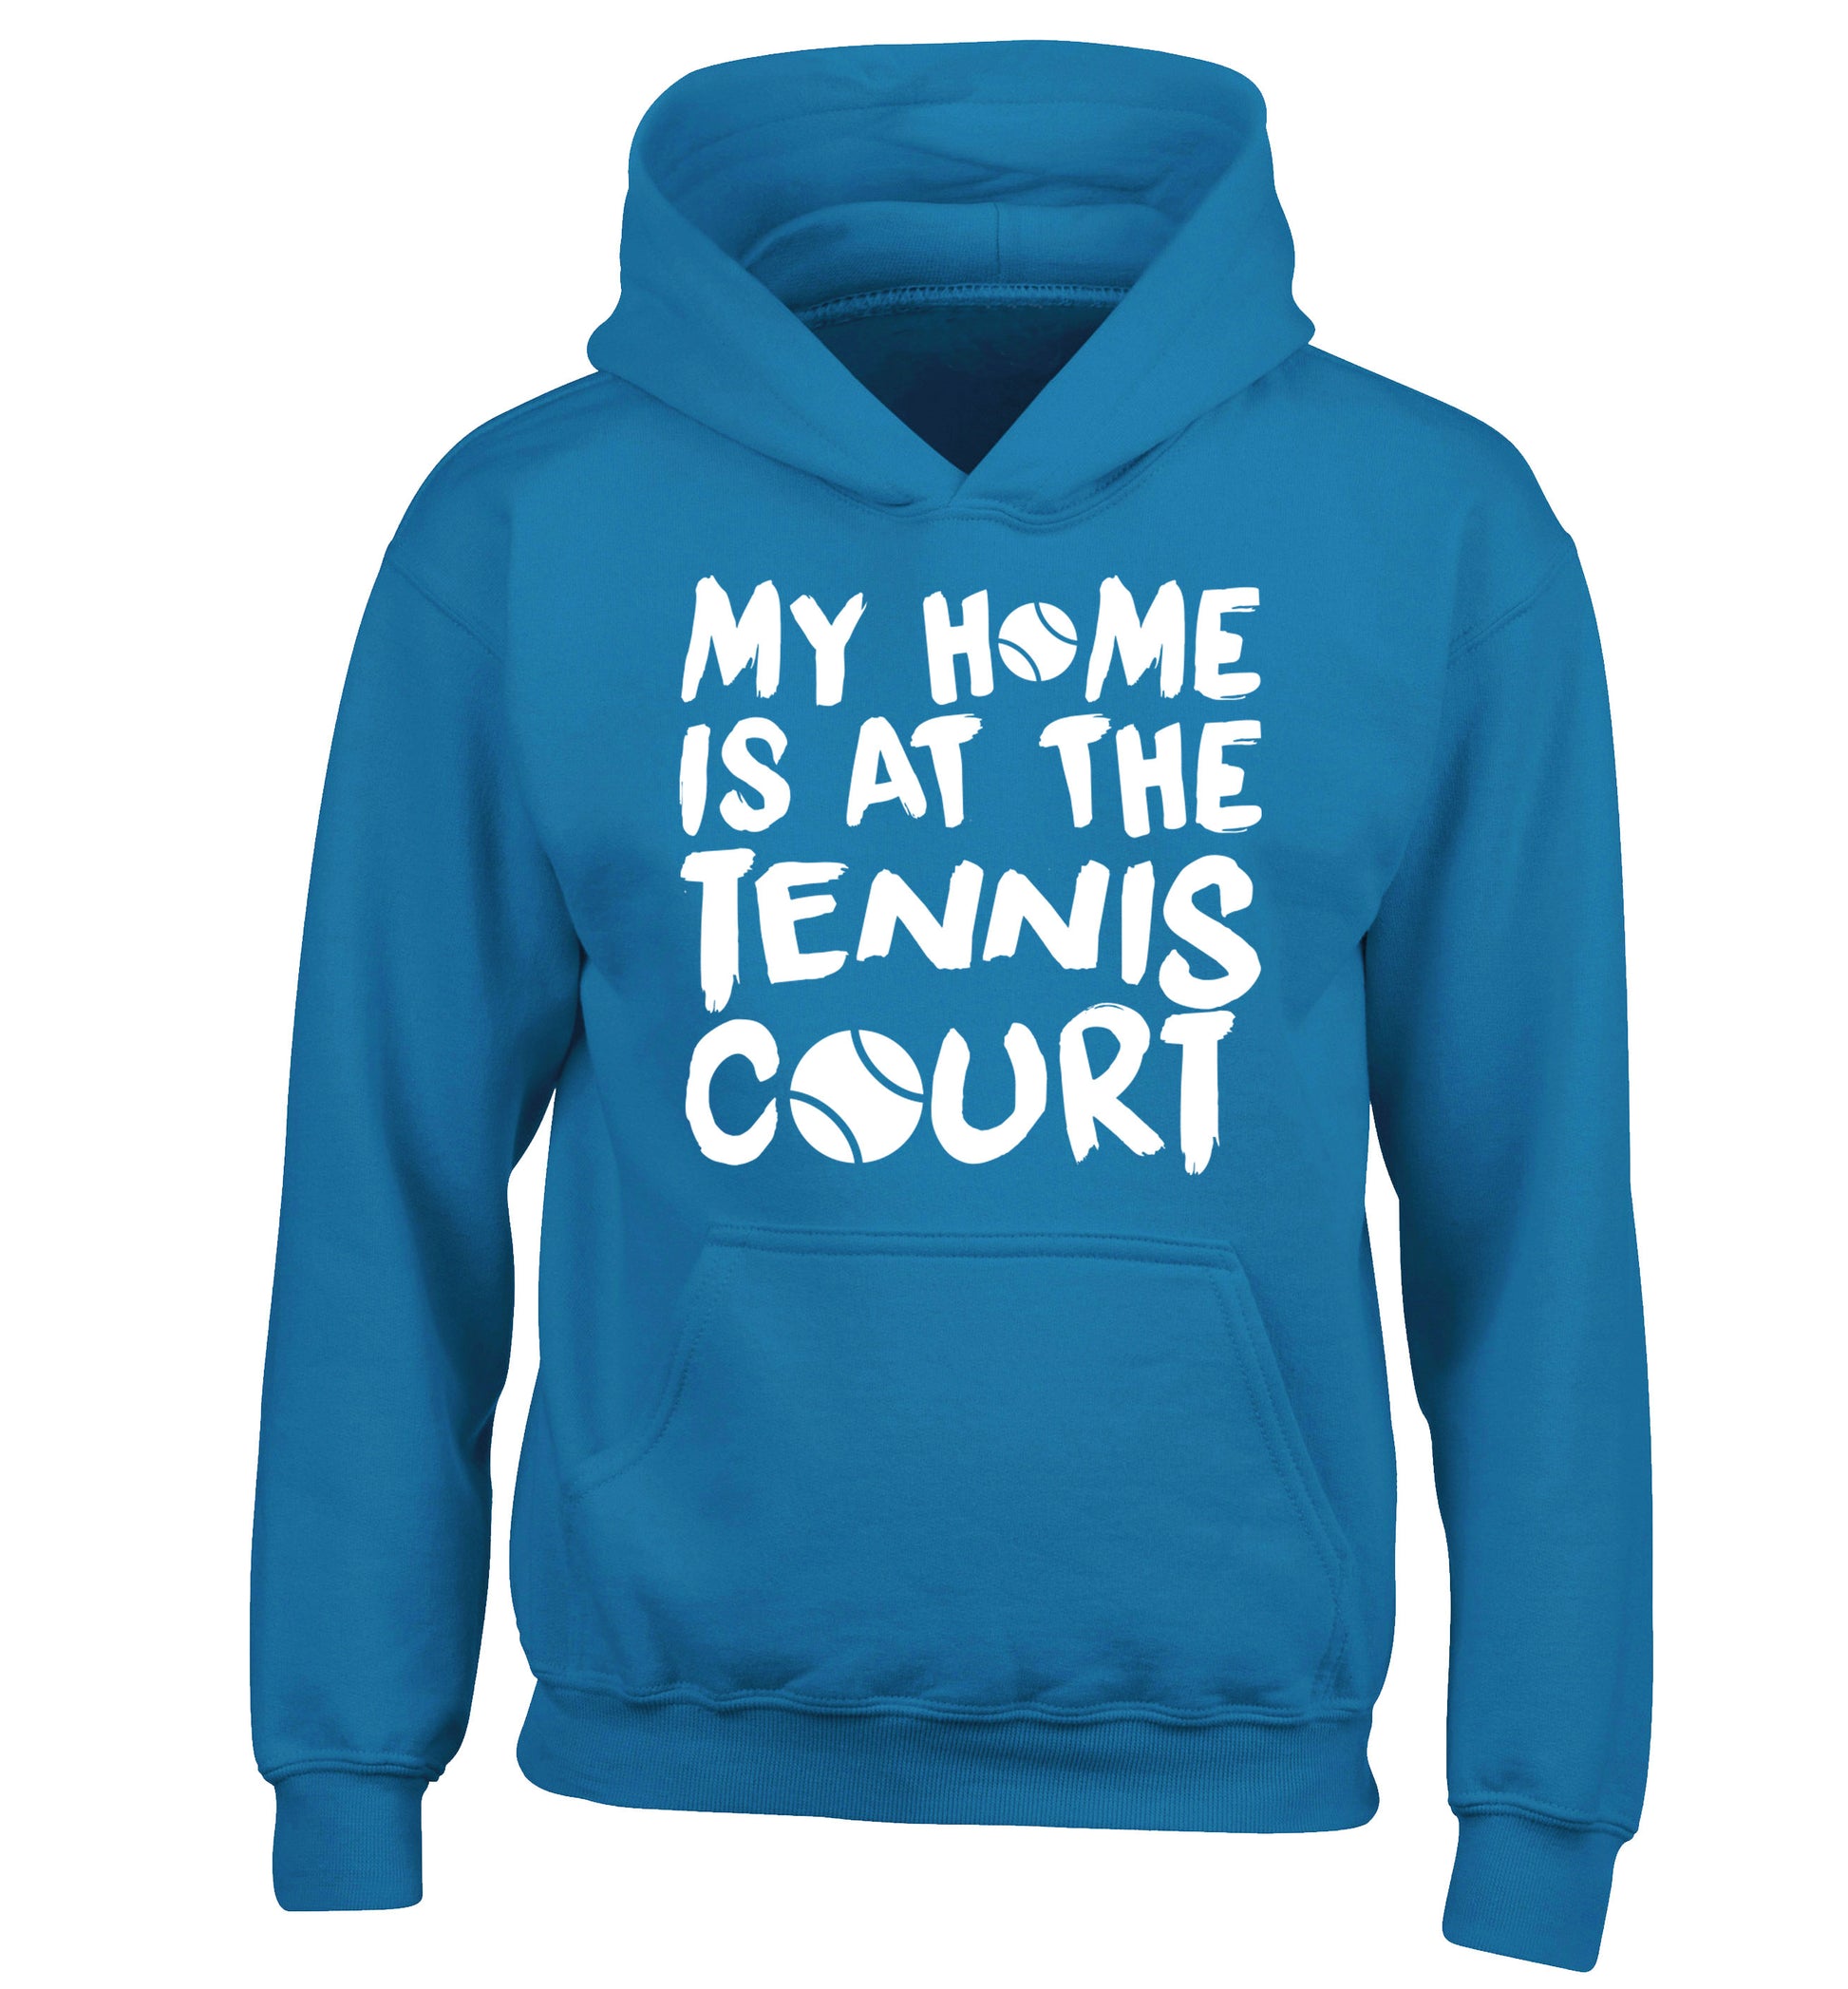 My home is at the tennis court children's blue hoodie 12-14 Years